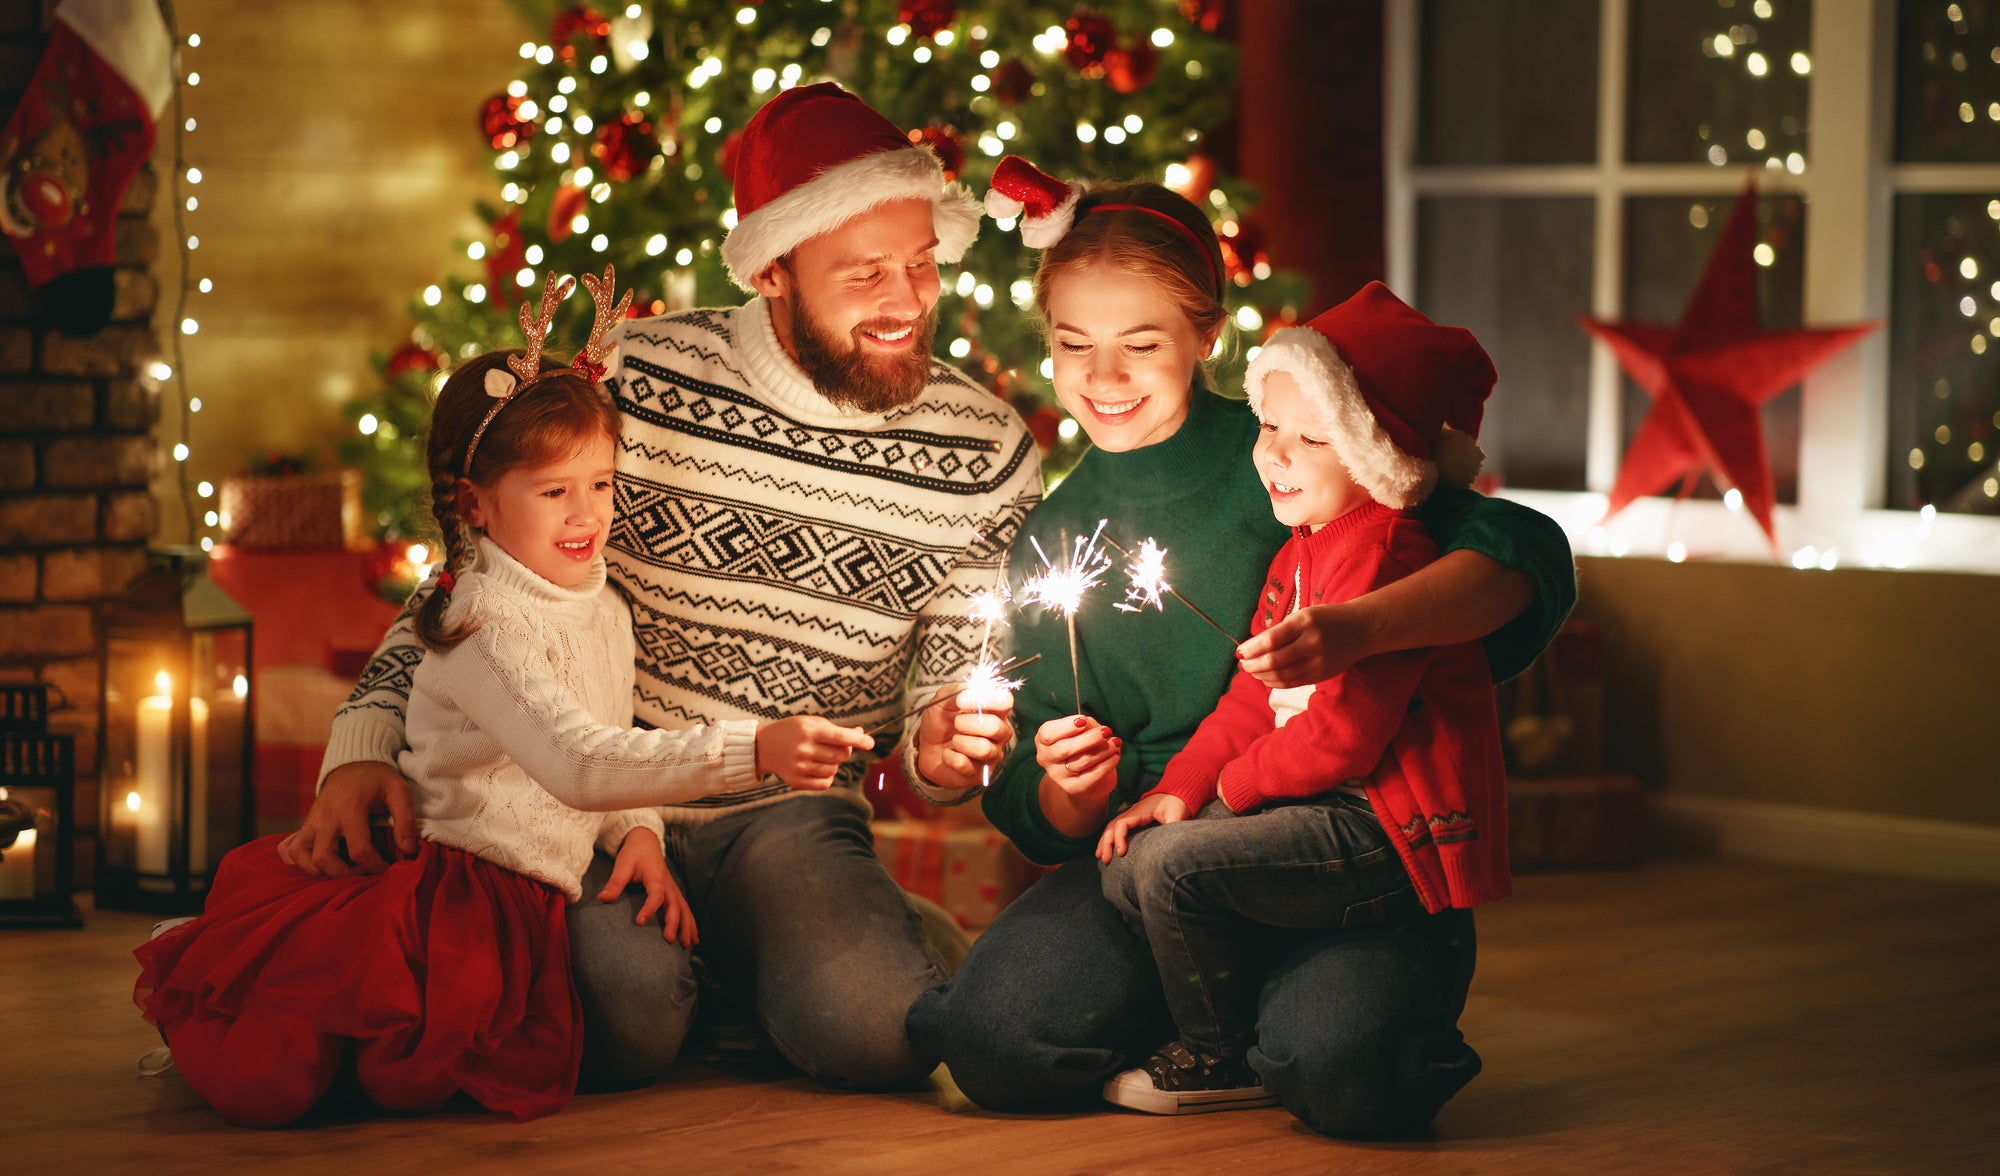 Have Yourself a Socially Distanced Christmas - Christmas Traditions for a Non-Traditional Year